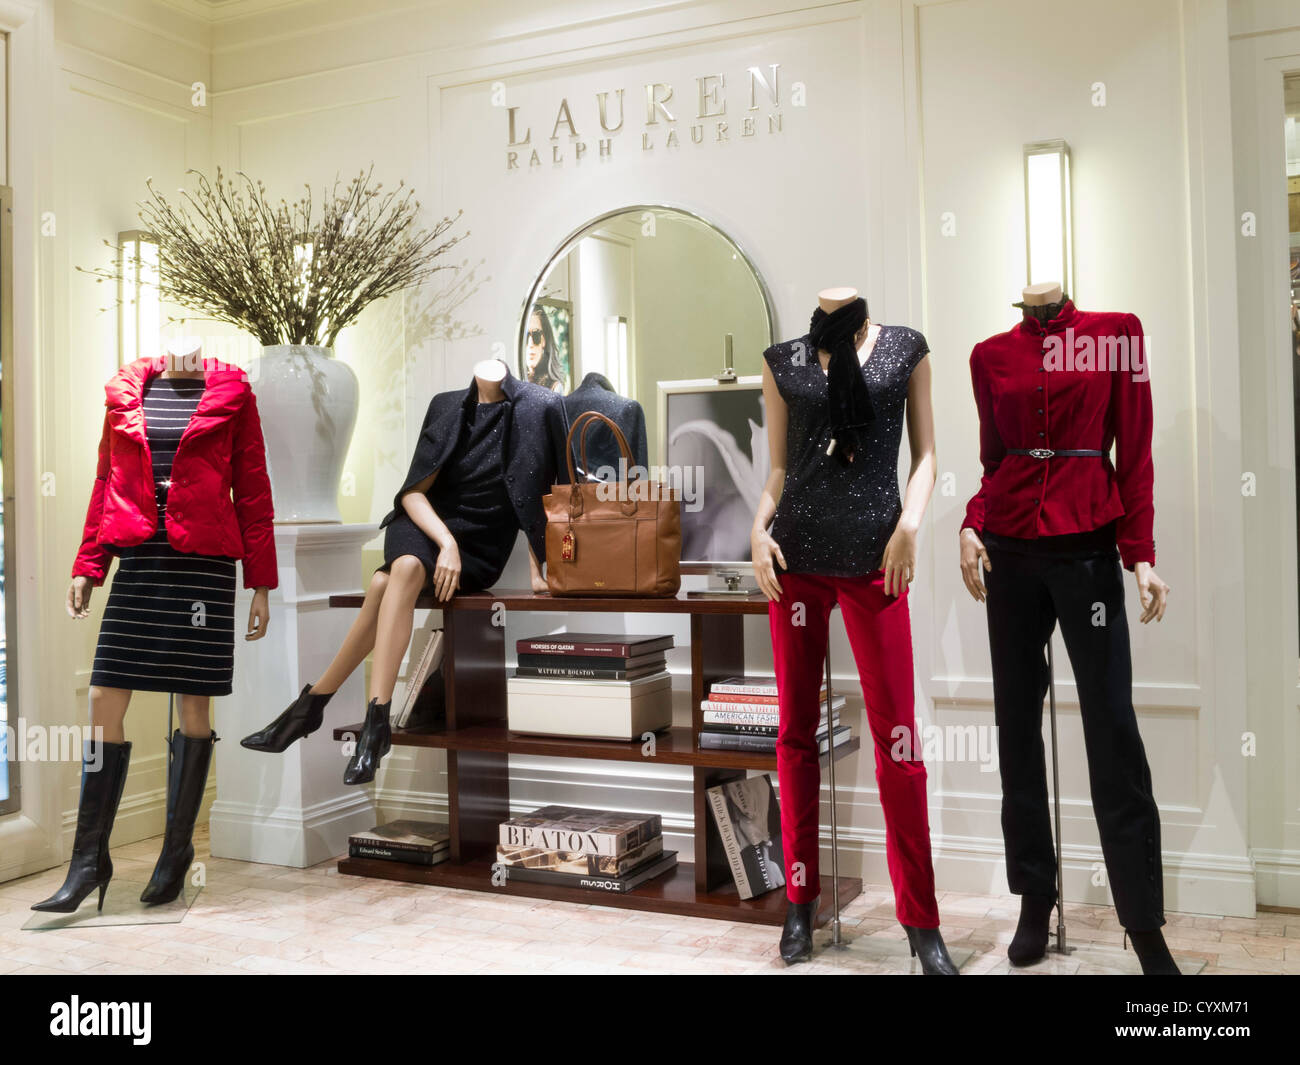 Ralph Lauren - Window shopping - and more! The flagship